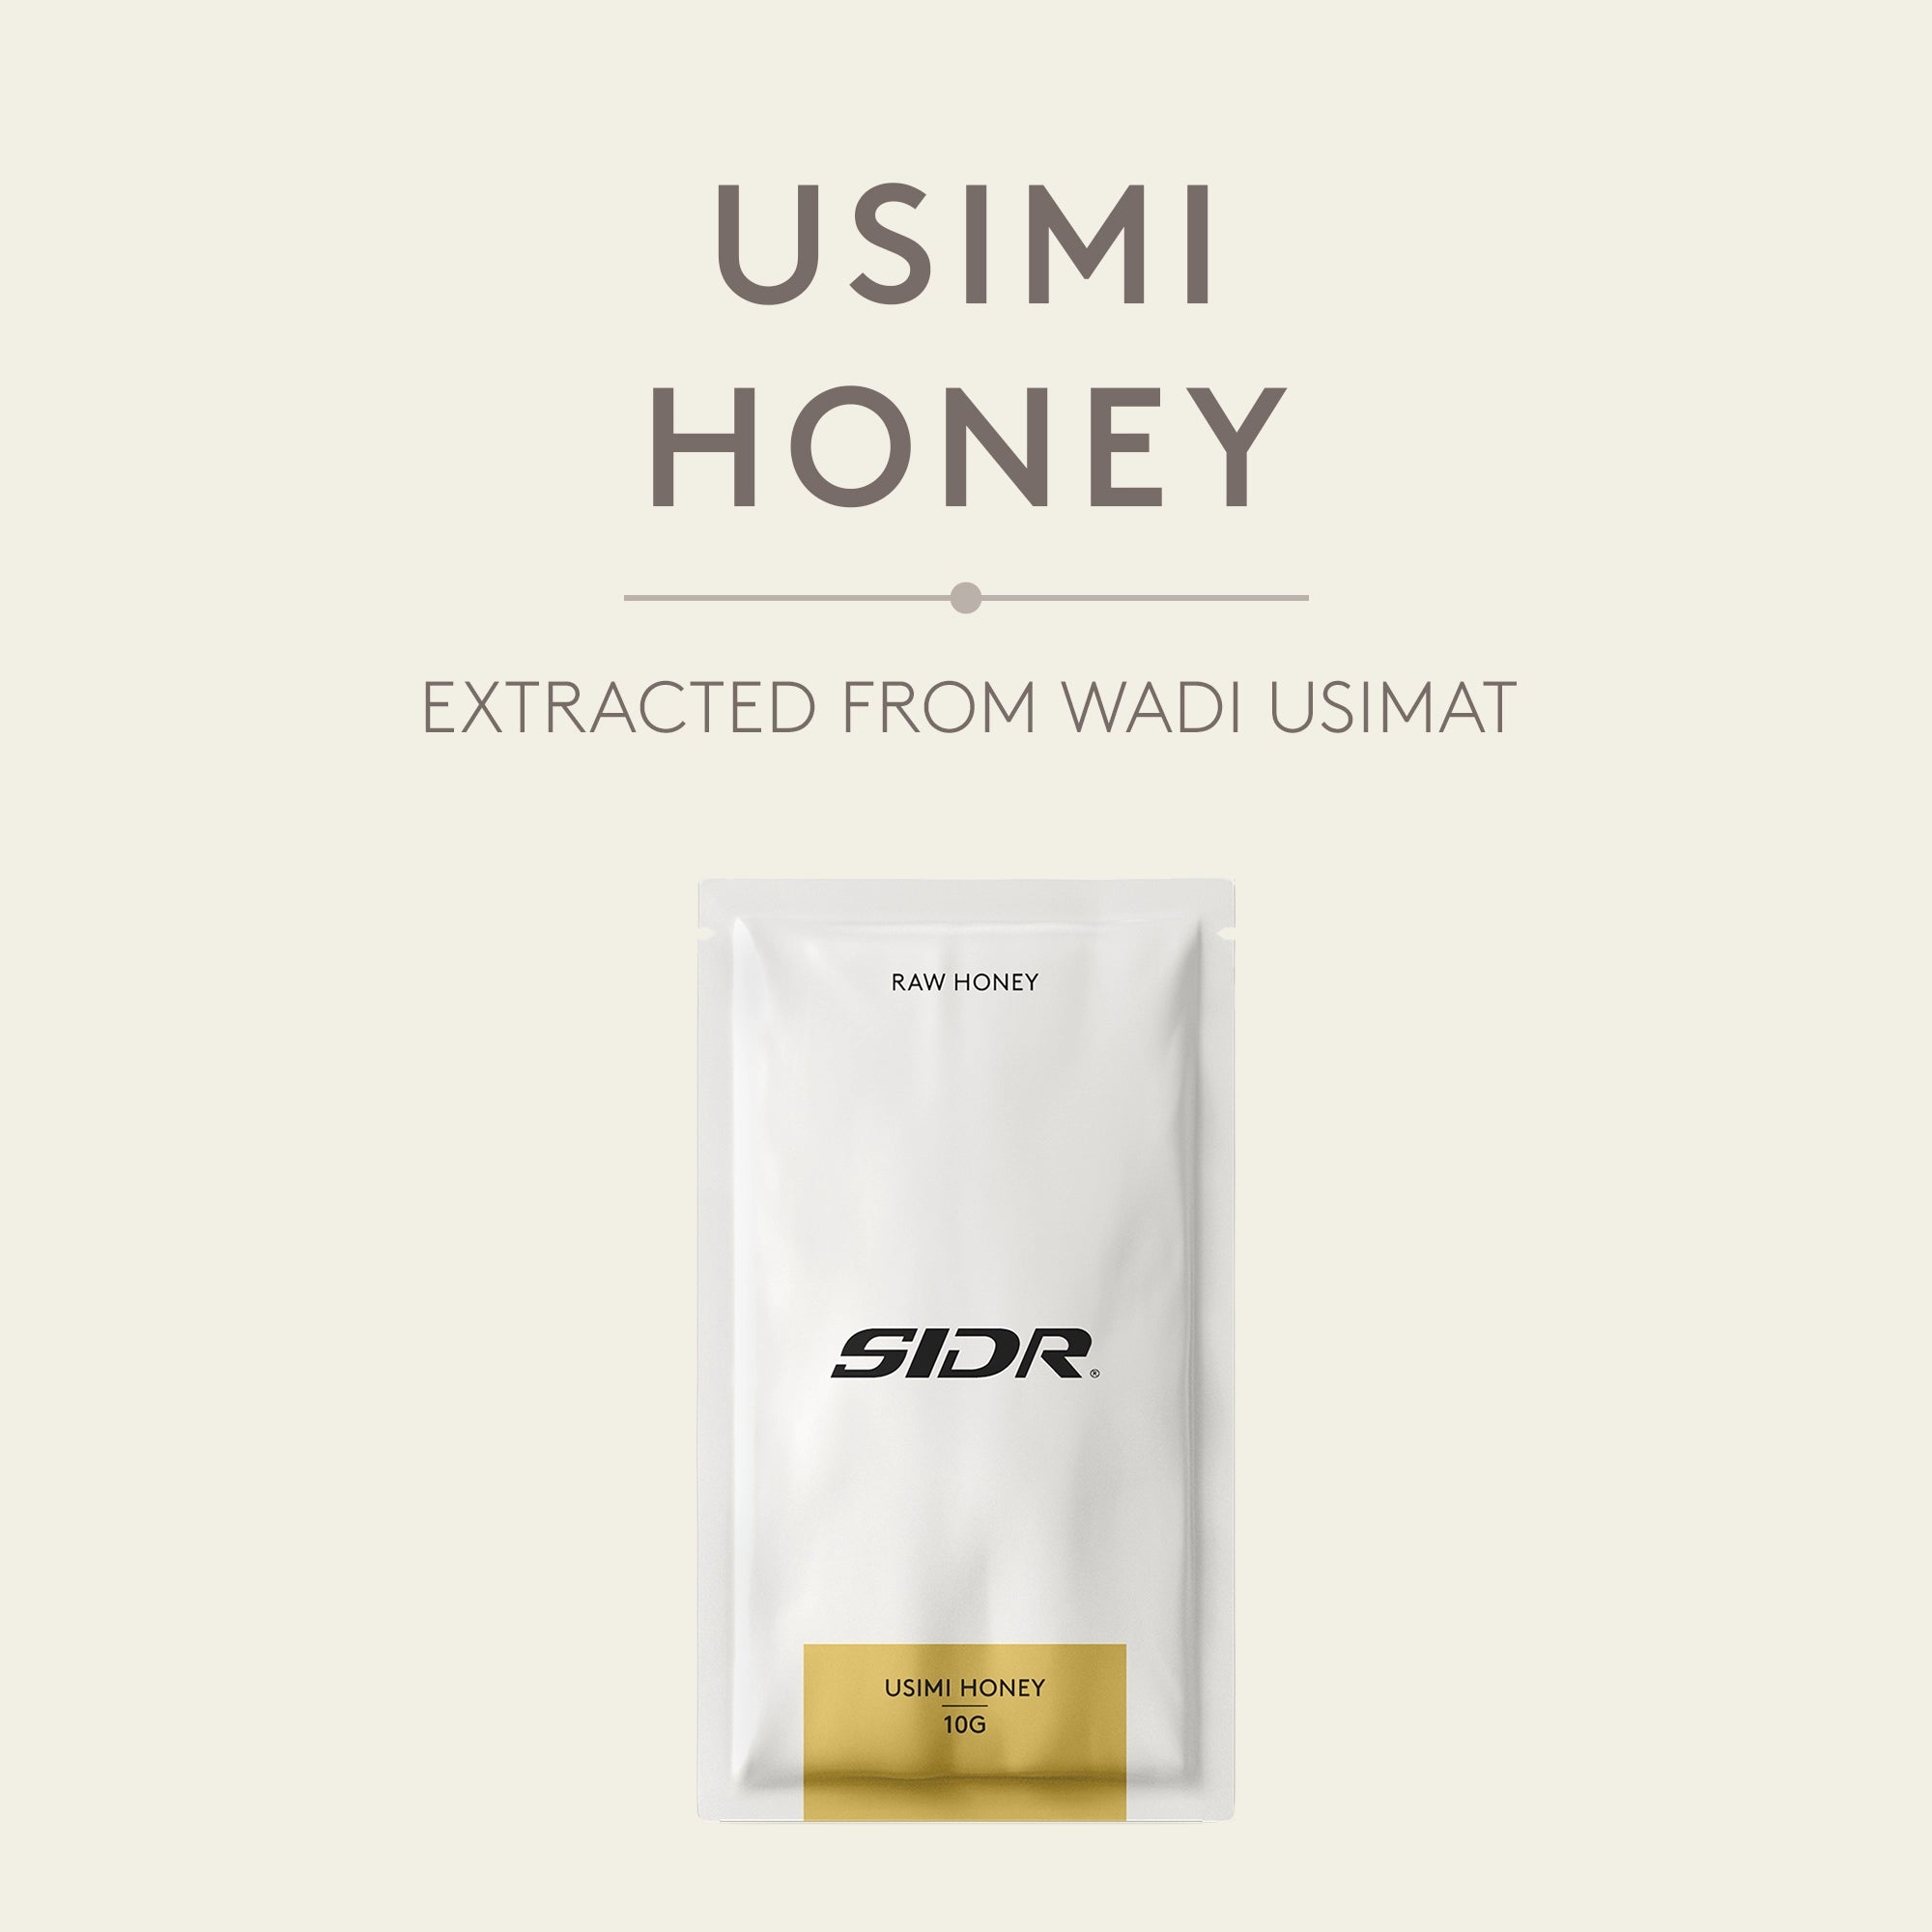 sidr usimi honey packet from wadi usimat